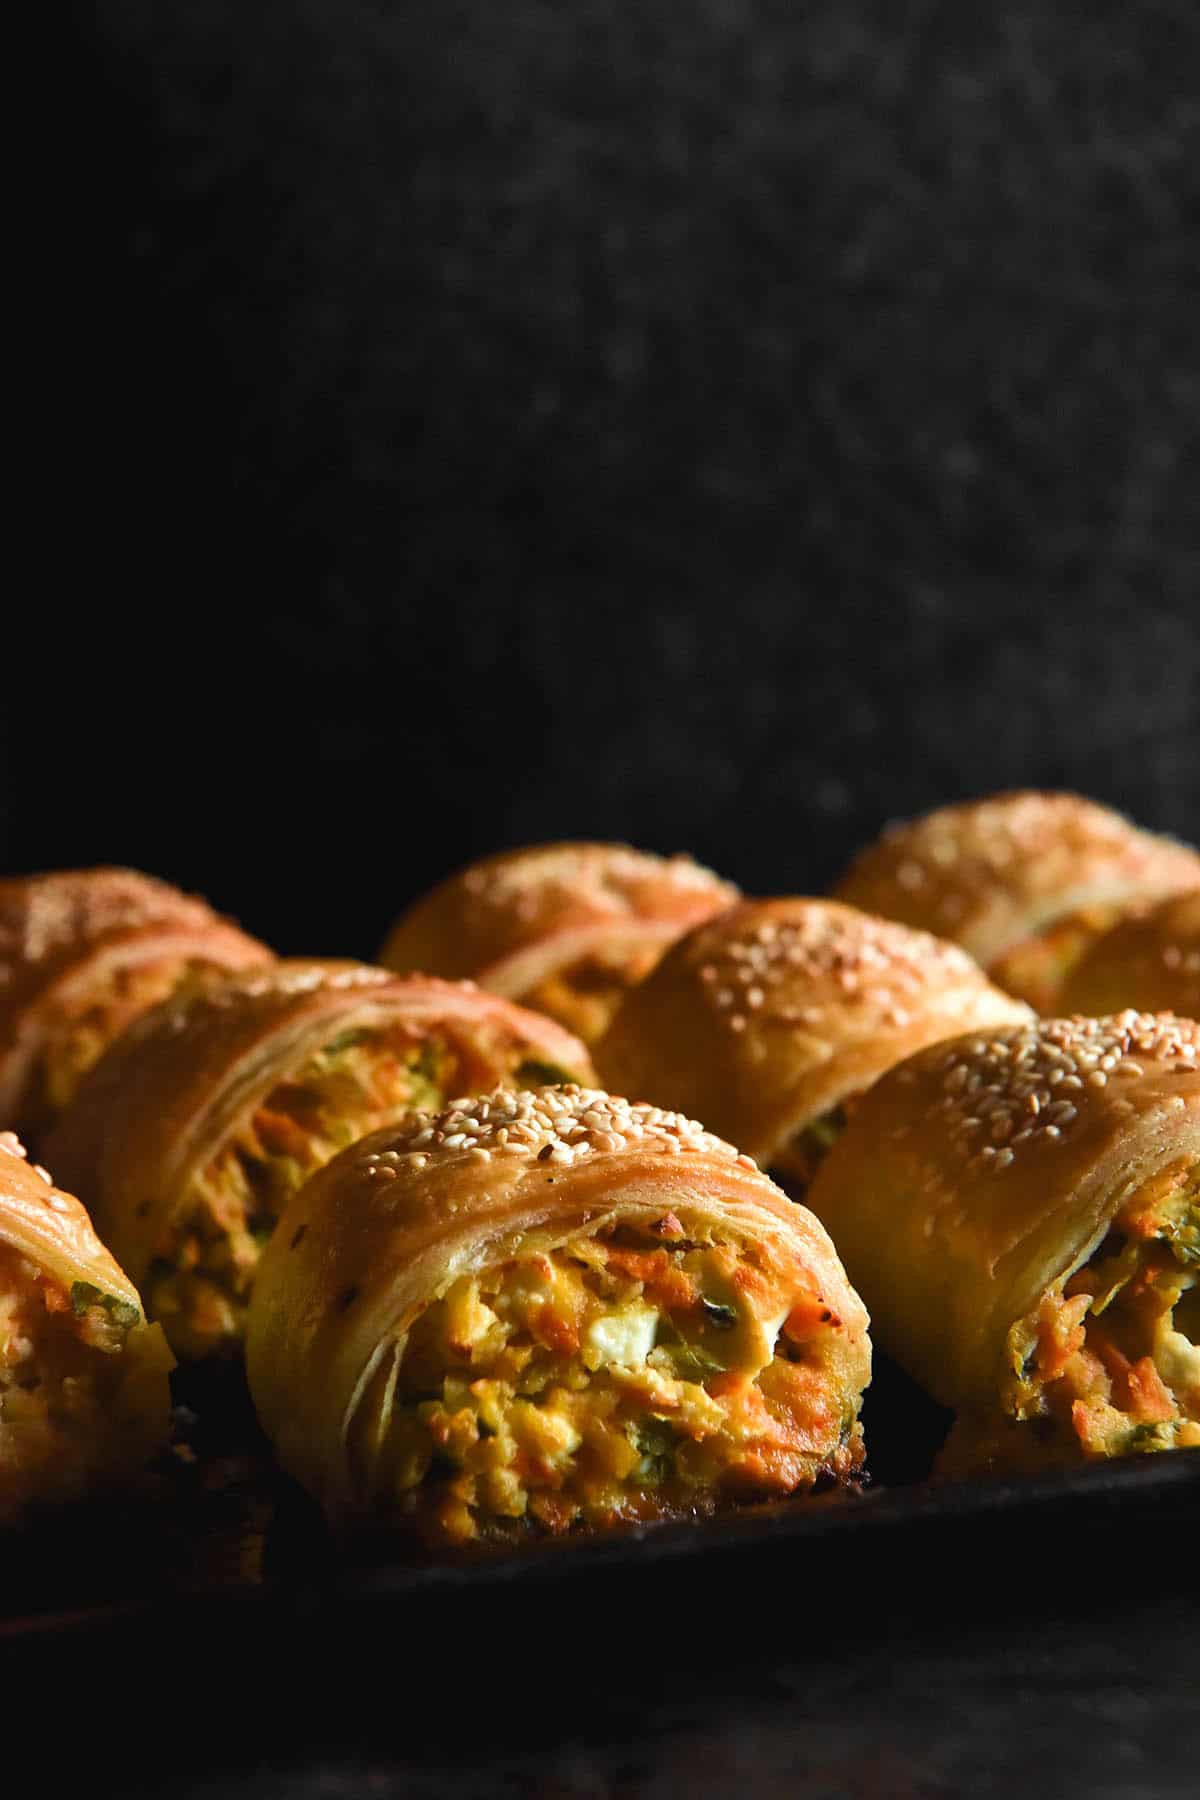 A side on, moody image of rows of gluten free chickpea, vegetable and feta sausage rolls. The rolls sit on a dark baking tray against the torso of a person wearing a dark grey fluffy jumper in the background. From the side on angle you can see the vegetables and feta peeking out from underneath flaky pastry topped with sesame seeds